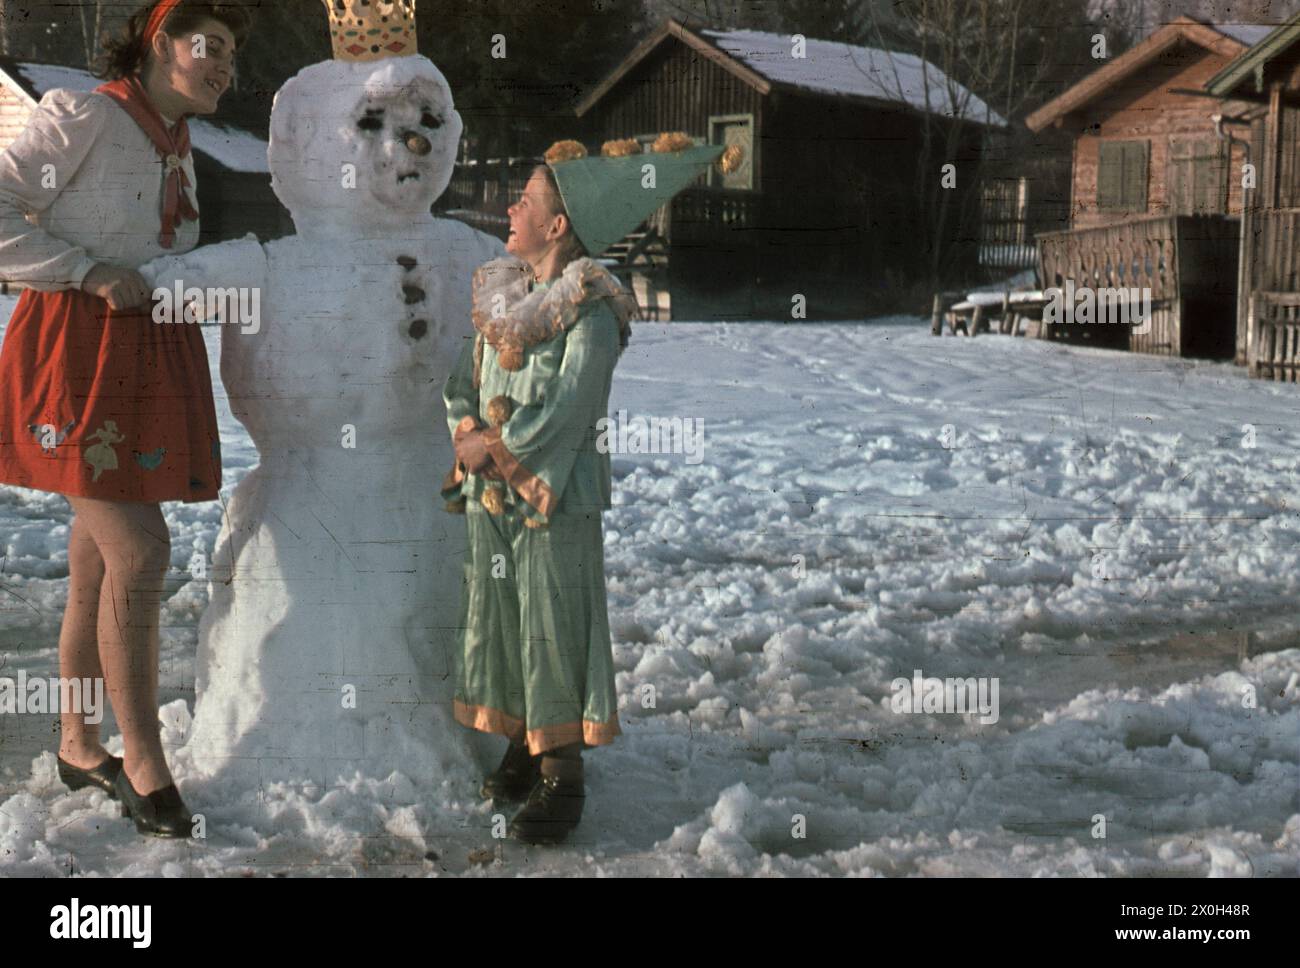 Two girls in carnival costumes have built a snowman with a crown at the Wörthsee. The girl on the right is wearing a clown costume. In the background there are houses. [automated translation] Stock Photo